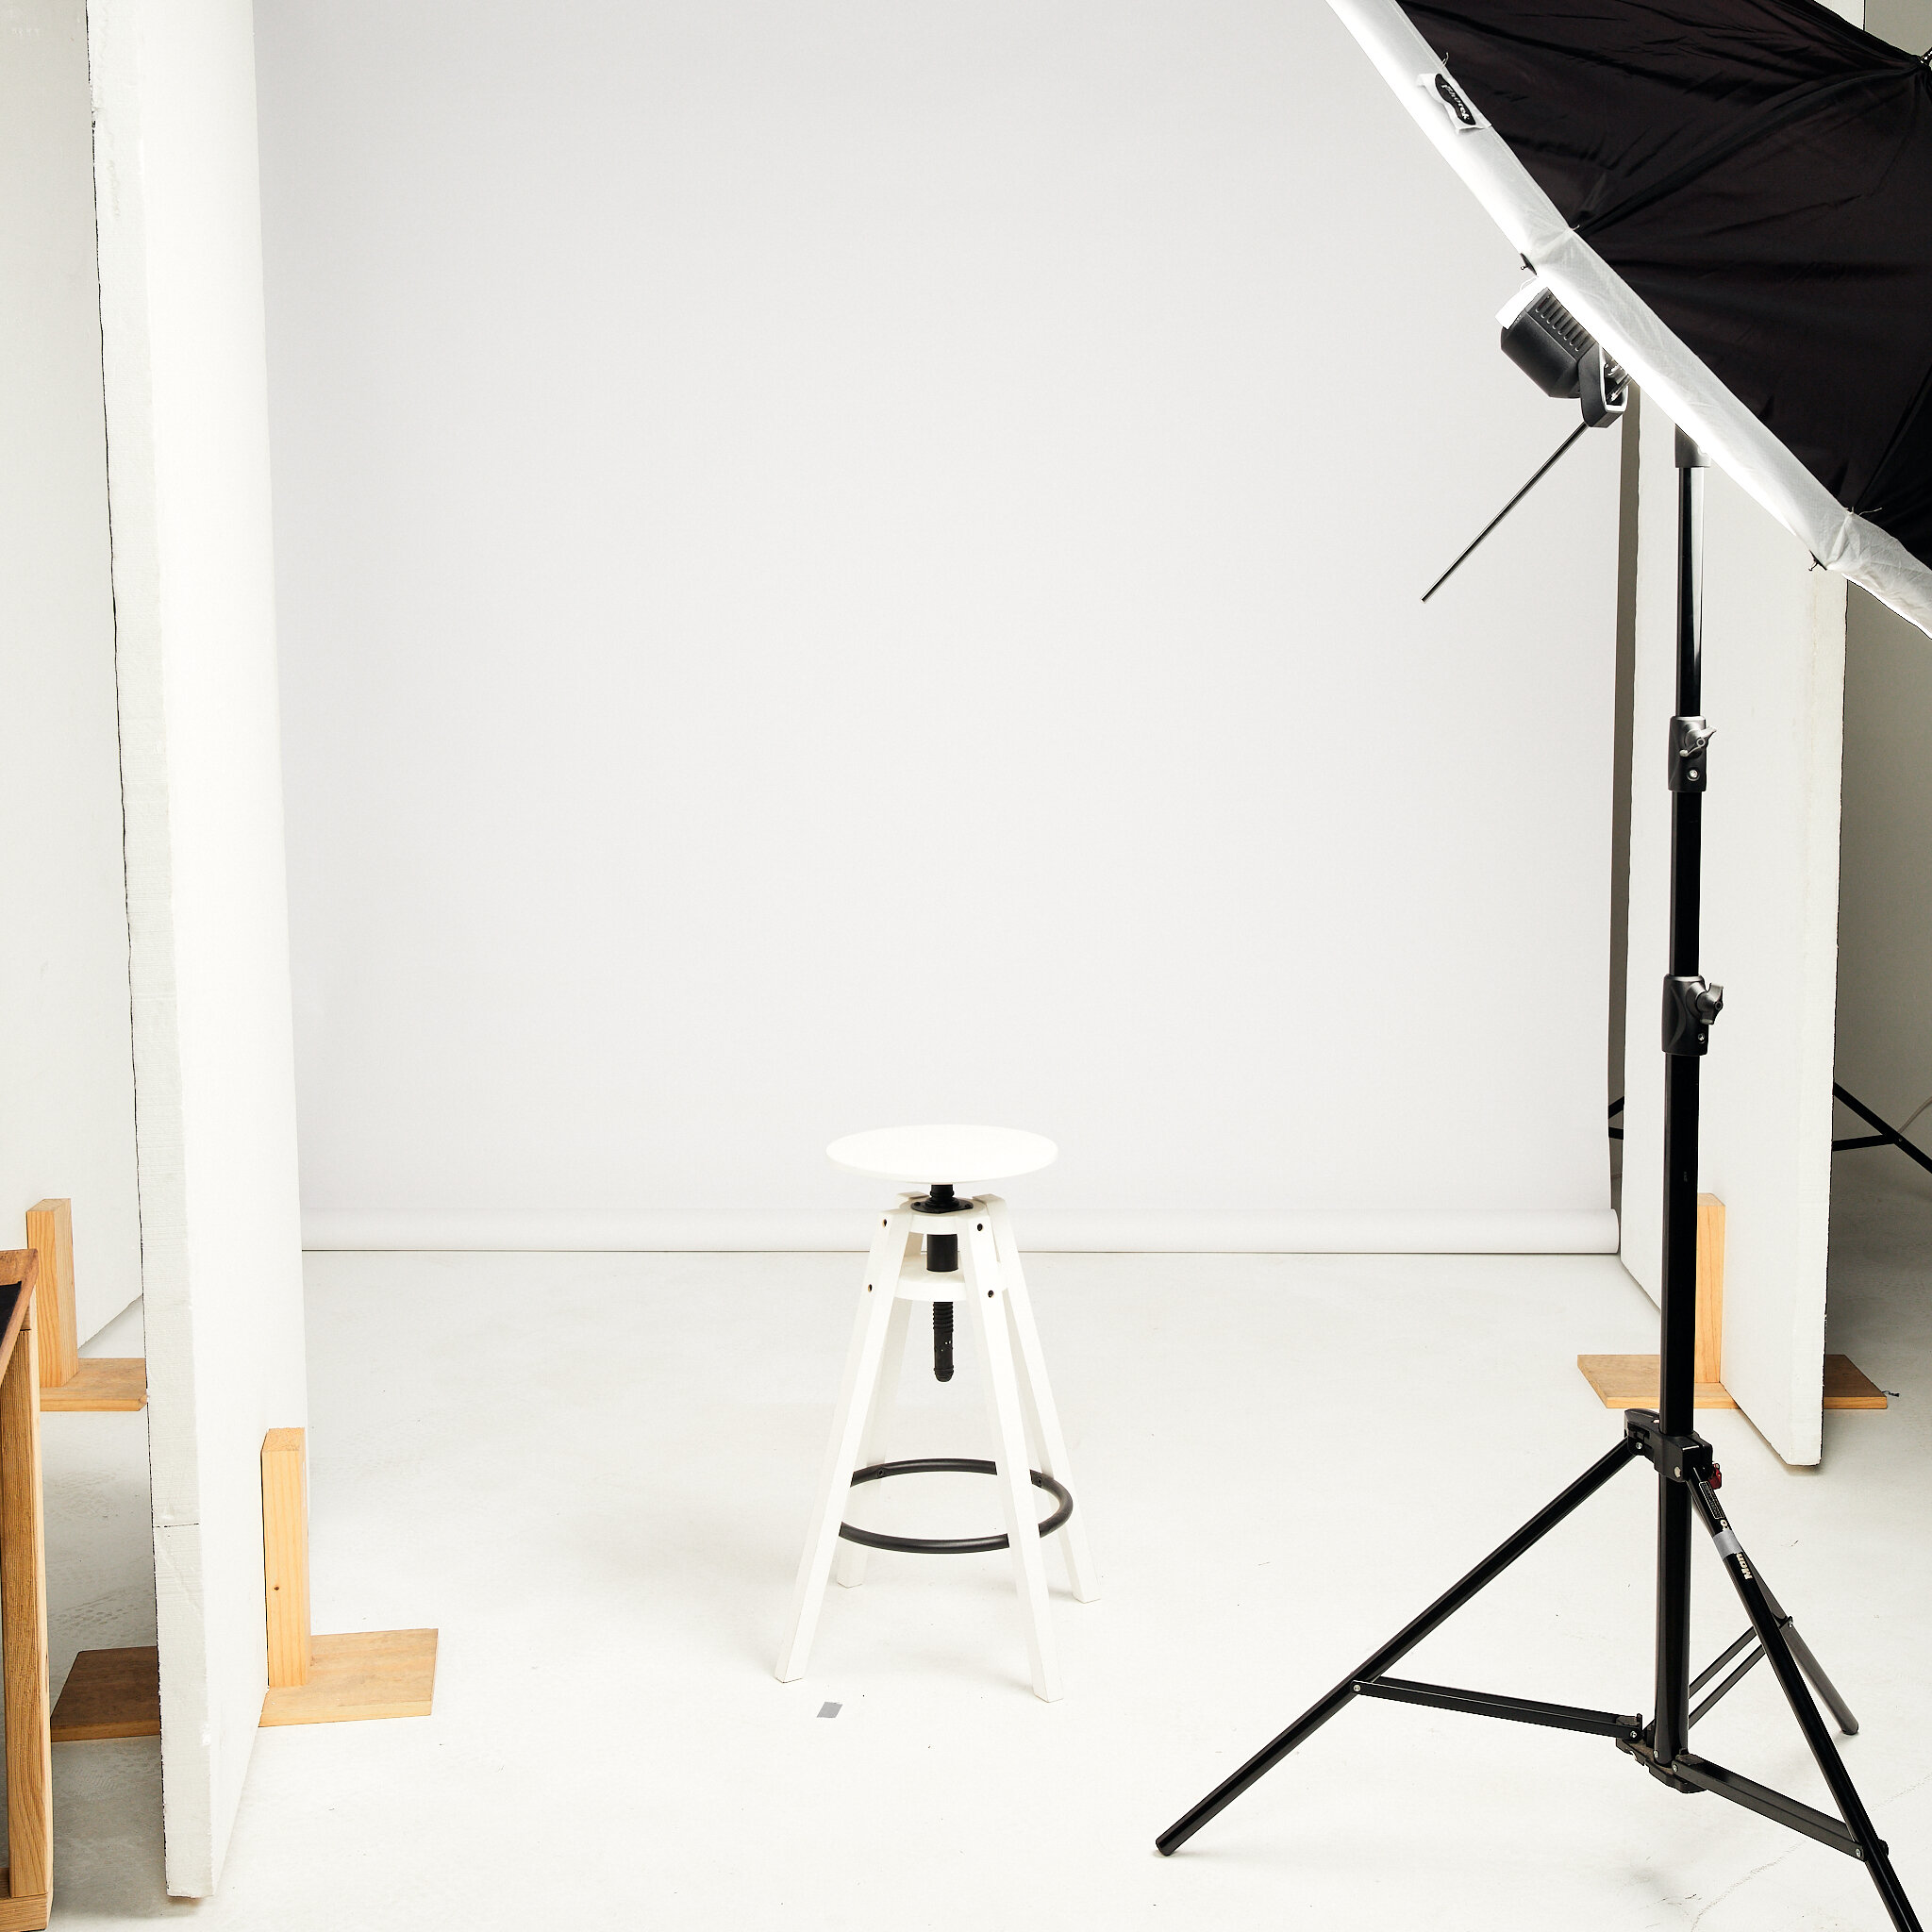 Our studio setup is a space where you will feel comfortable having your best headshot taken! 😁